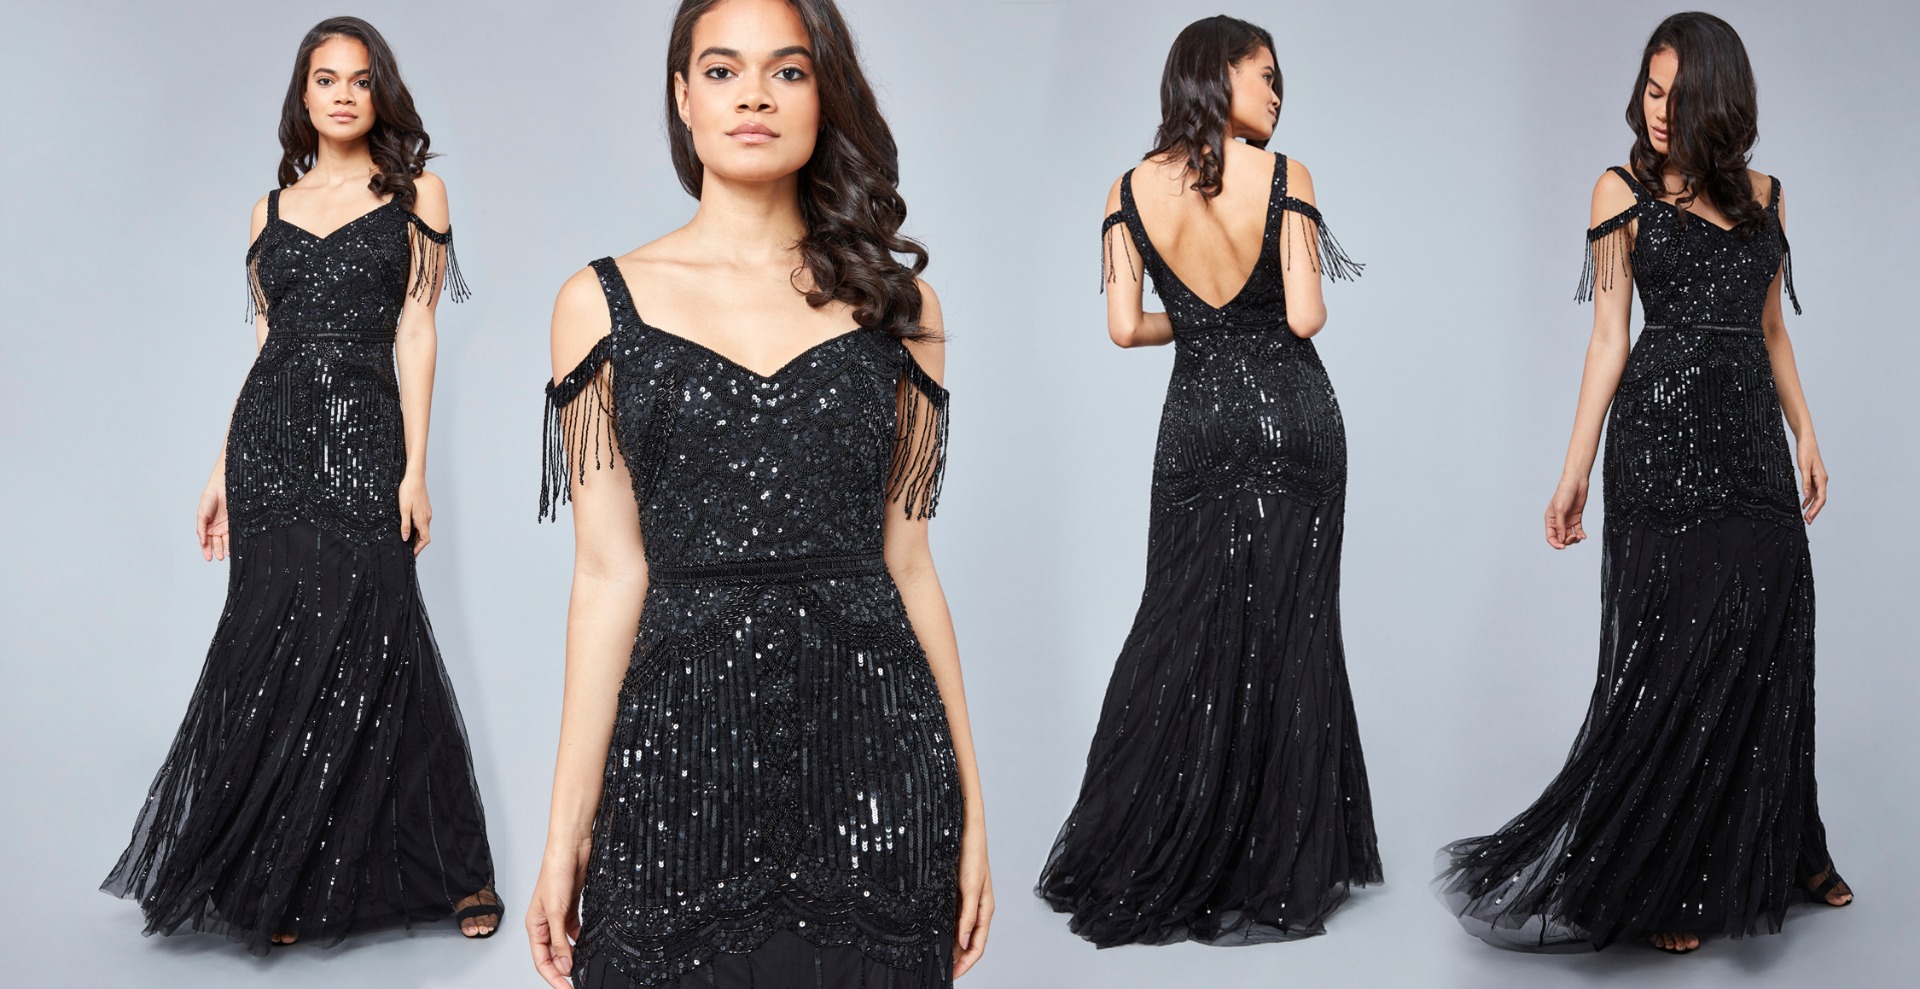 milly sequin dress